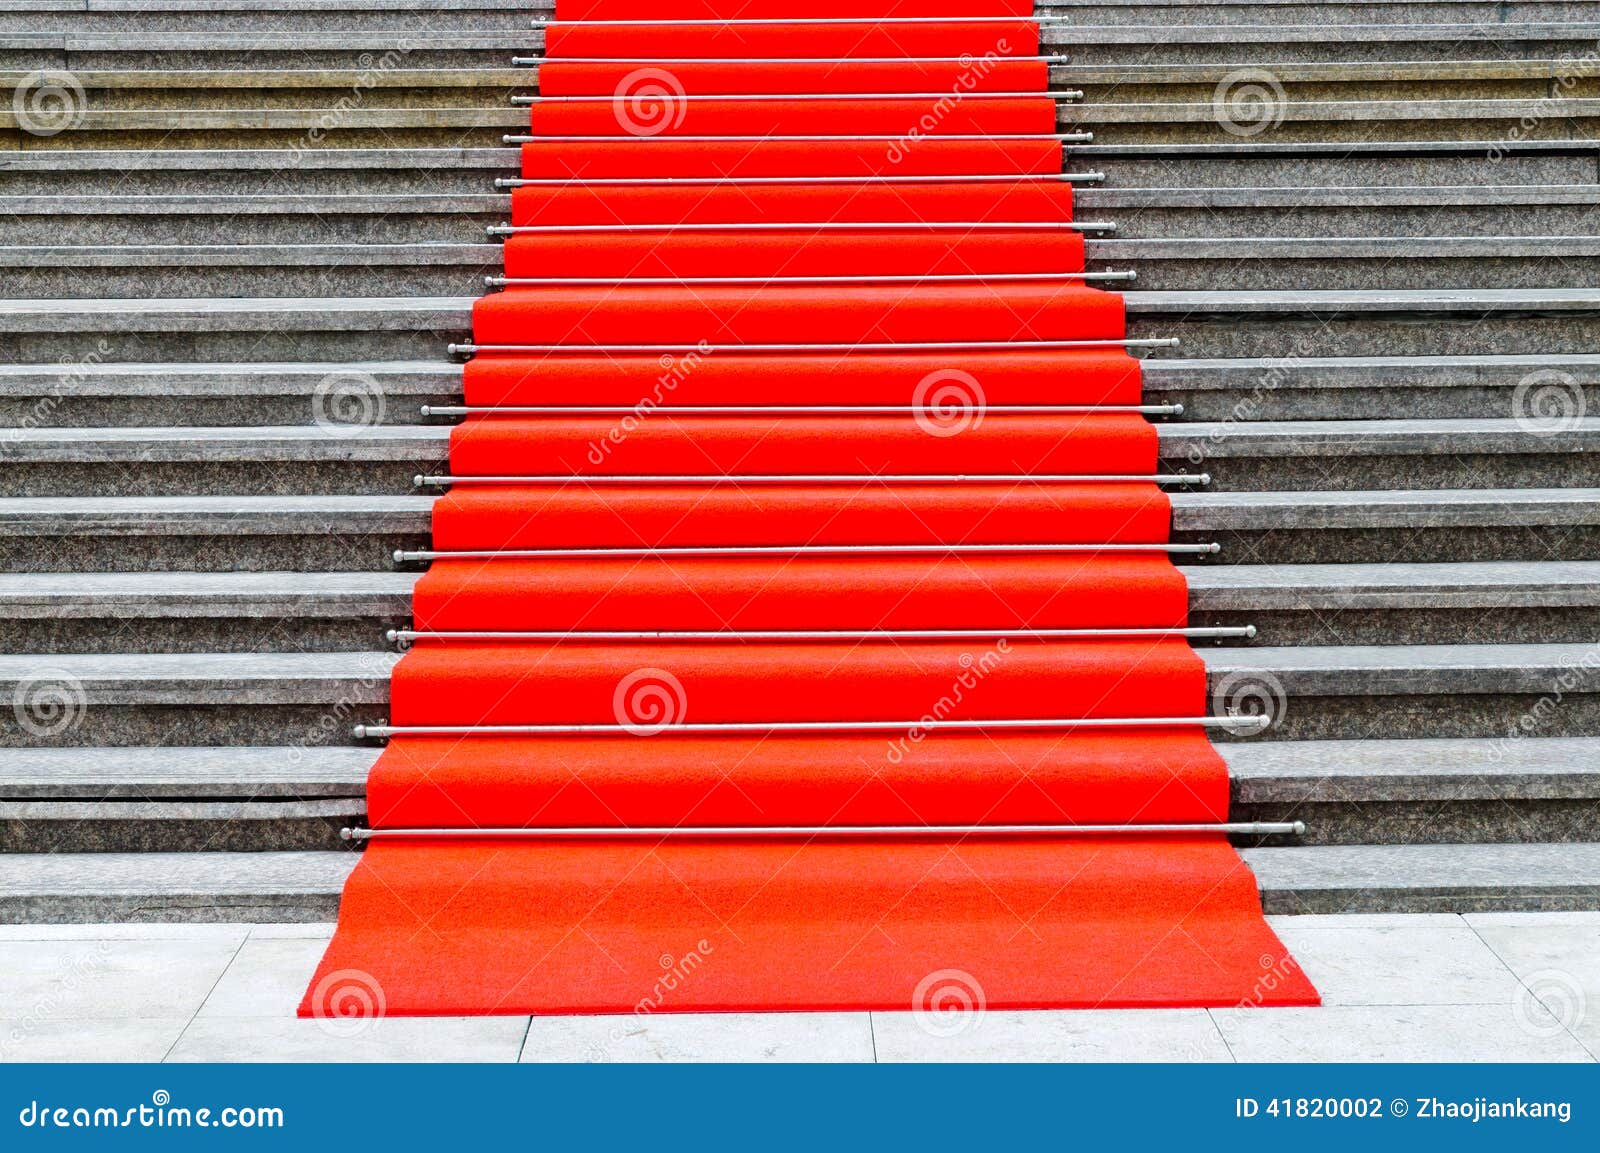 pave in red carpet stairs